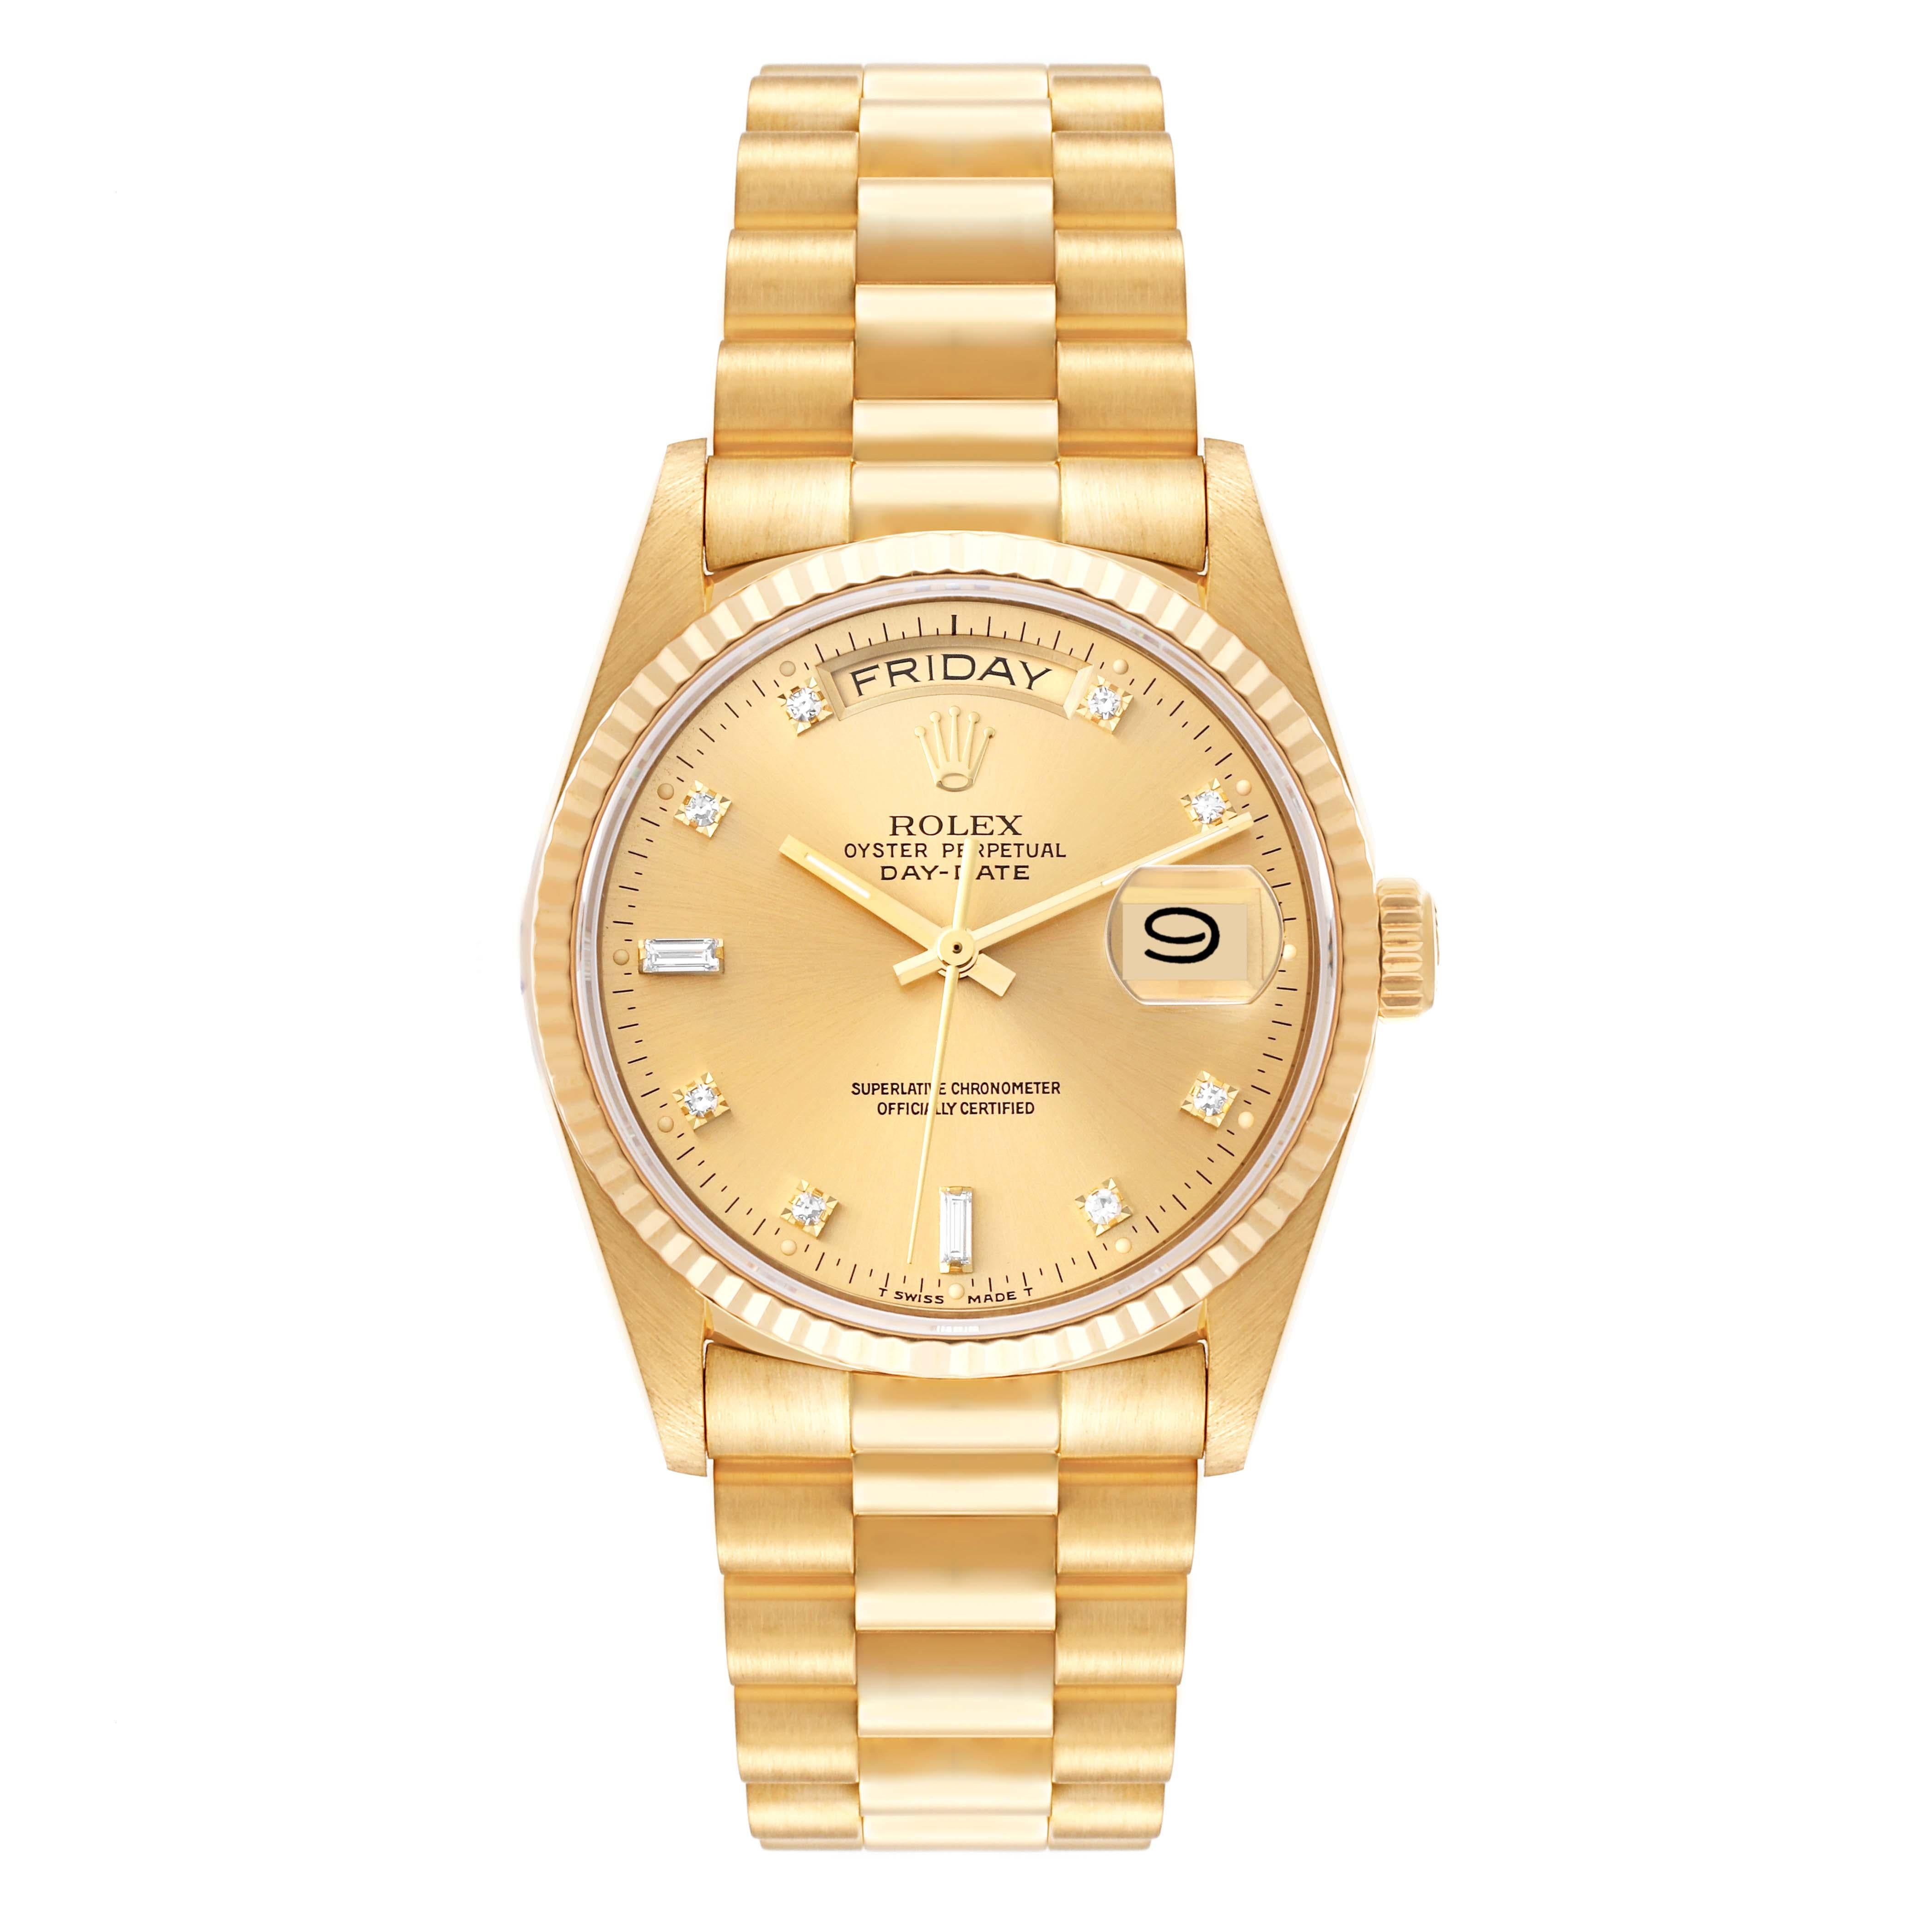 Rolex President Day-Date 18k Yellow Gold Diamond Mens Watch 18038. Officially certified chronometer automatic self-winding movement. 18k yellow gold oyster case 36 mm in diameter. Rolex logo on a crown. 18K yellow gold fluted bezel. Scratch